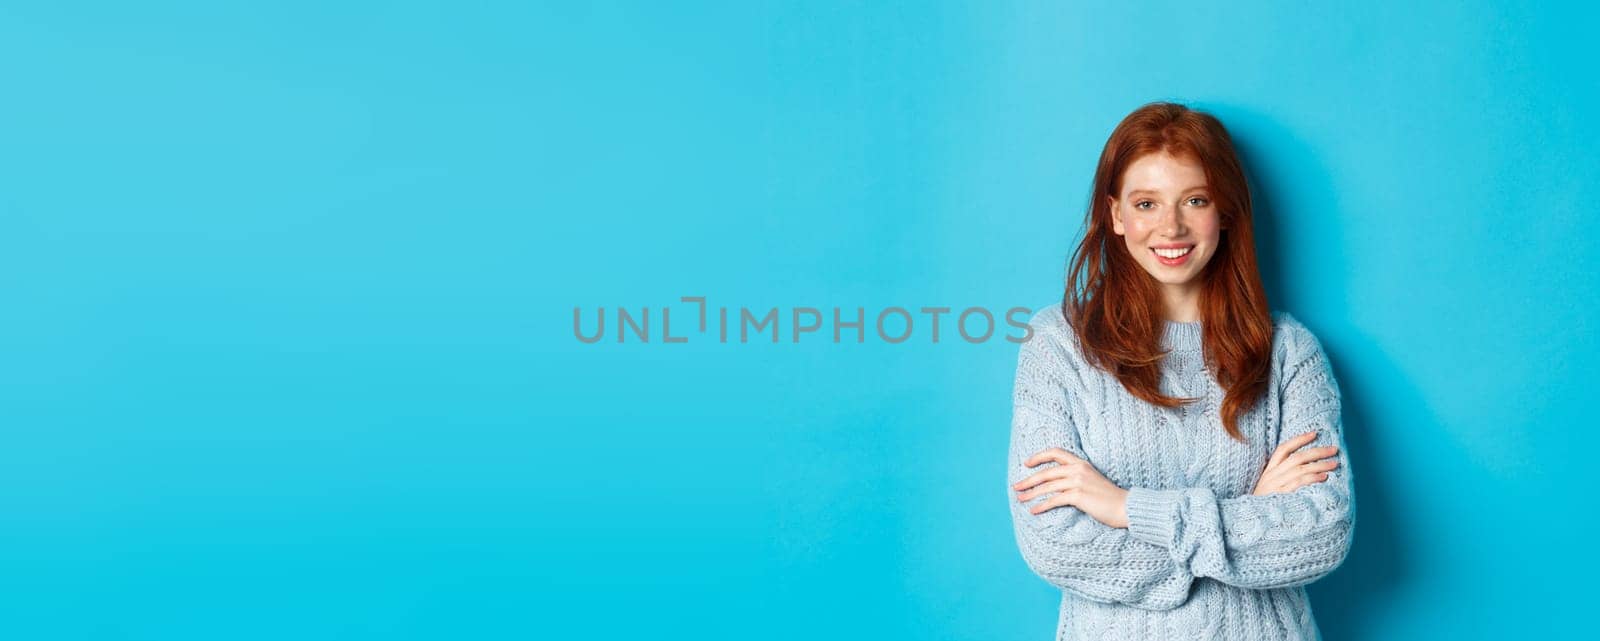 Attractive redhead girl in sweater smiling and staring at camera, standing confident against blue background.